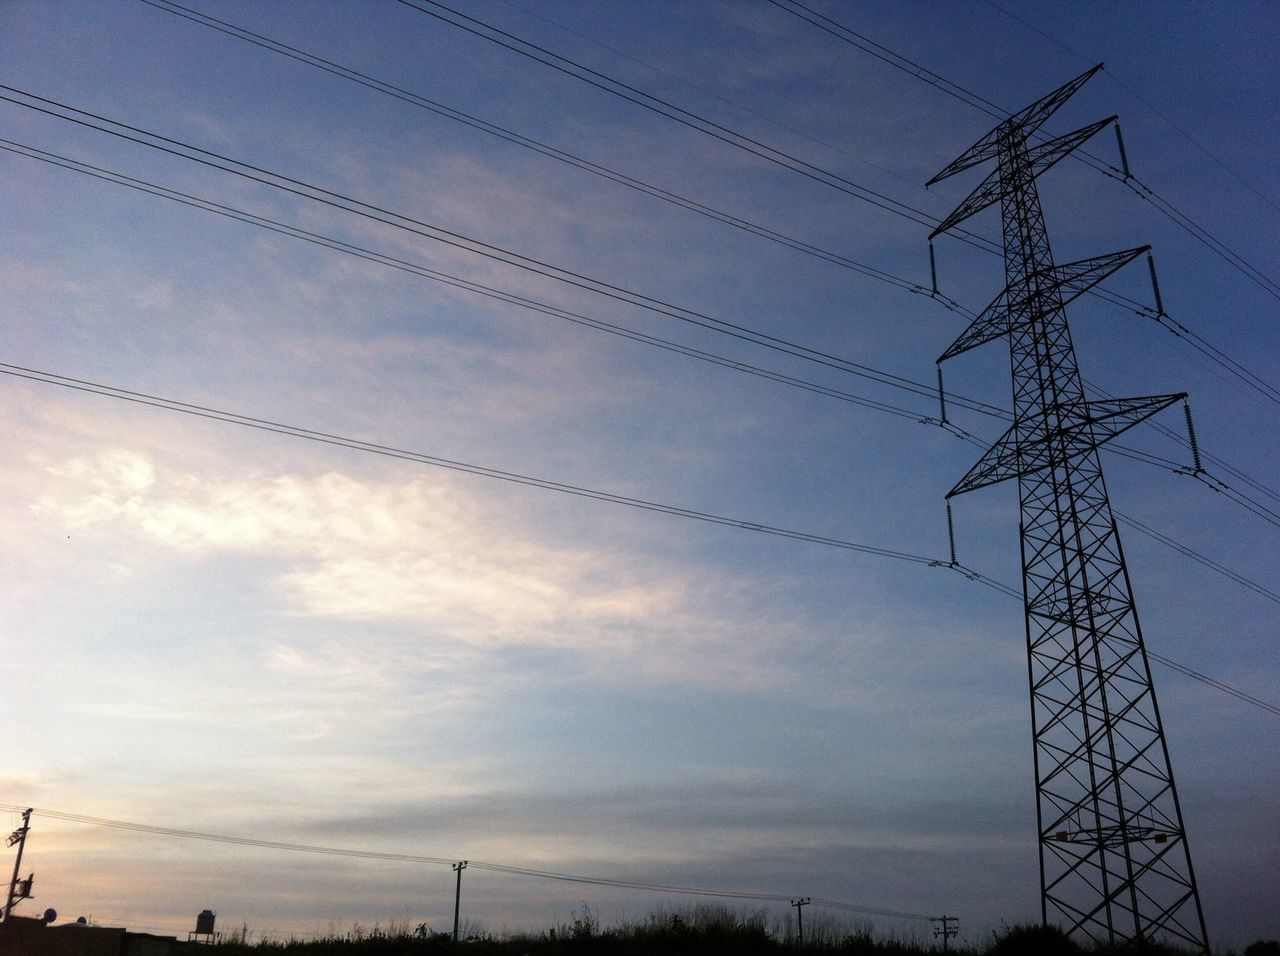 power line, electricity pylon, power supply, electricity, fuel and power generation, connection, sky, low angle view, cable, technology, silhouette, cloud - sky, power cable, dusk, cloud, nature, tranquility, sunset, outdoors, no people